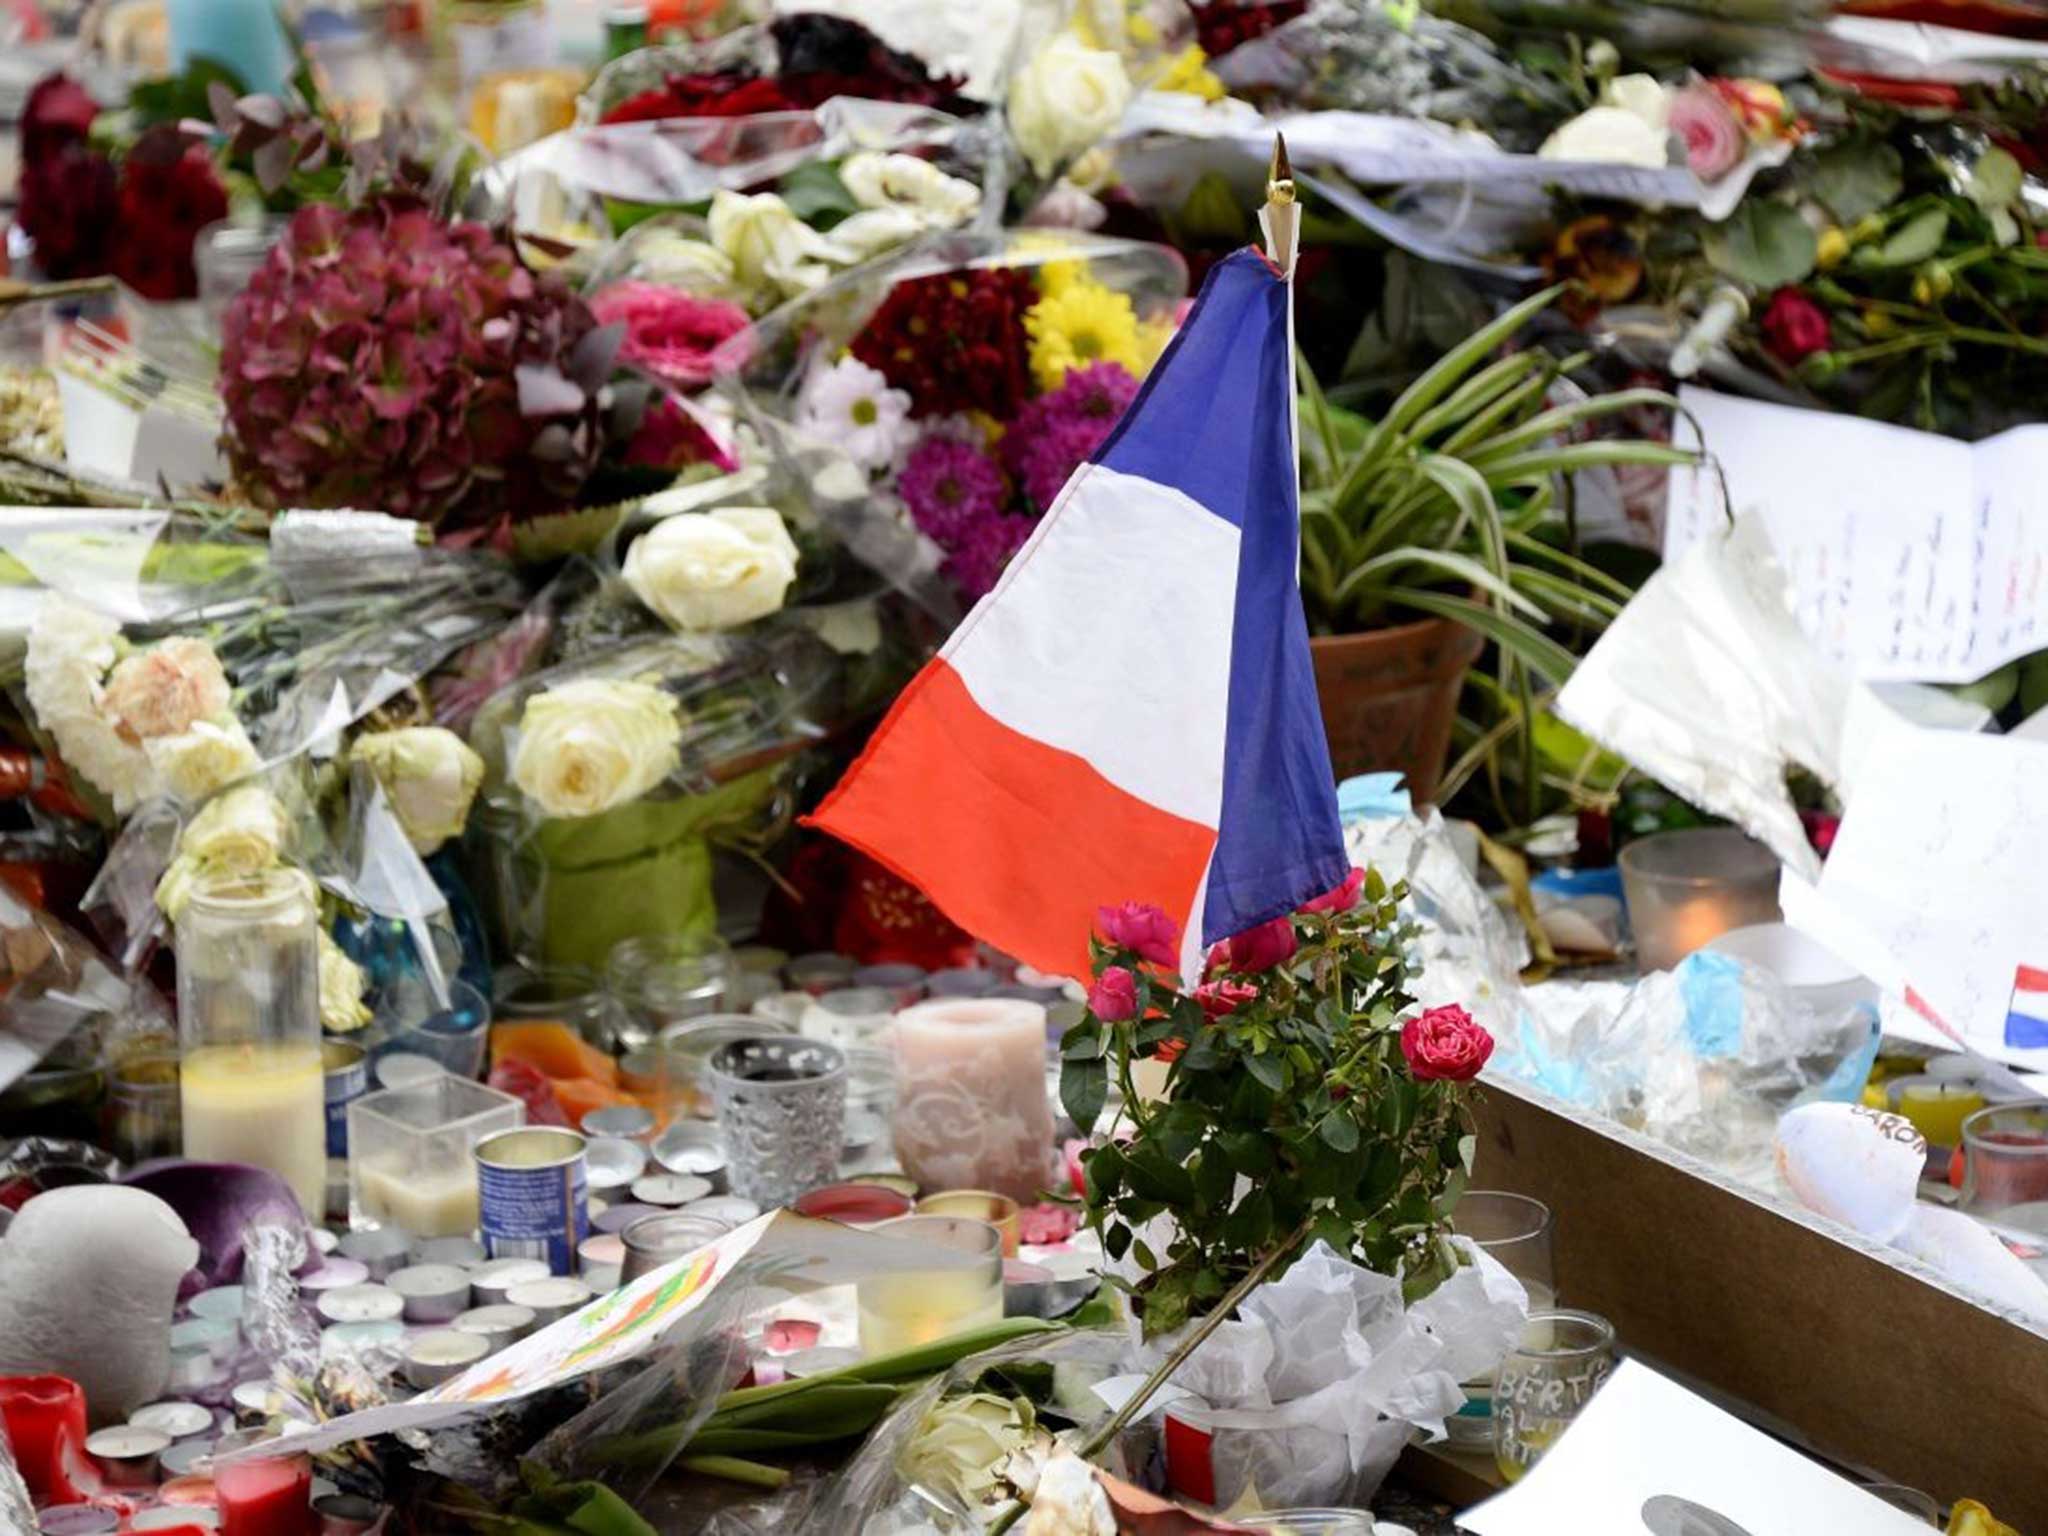 89 people were killed at the Bataclan concert hall